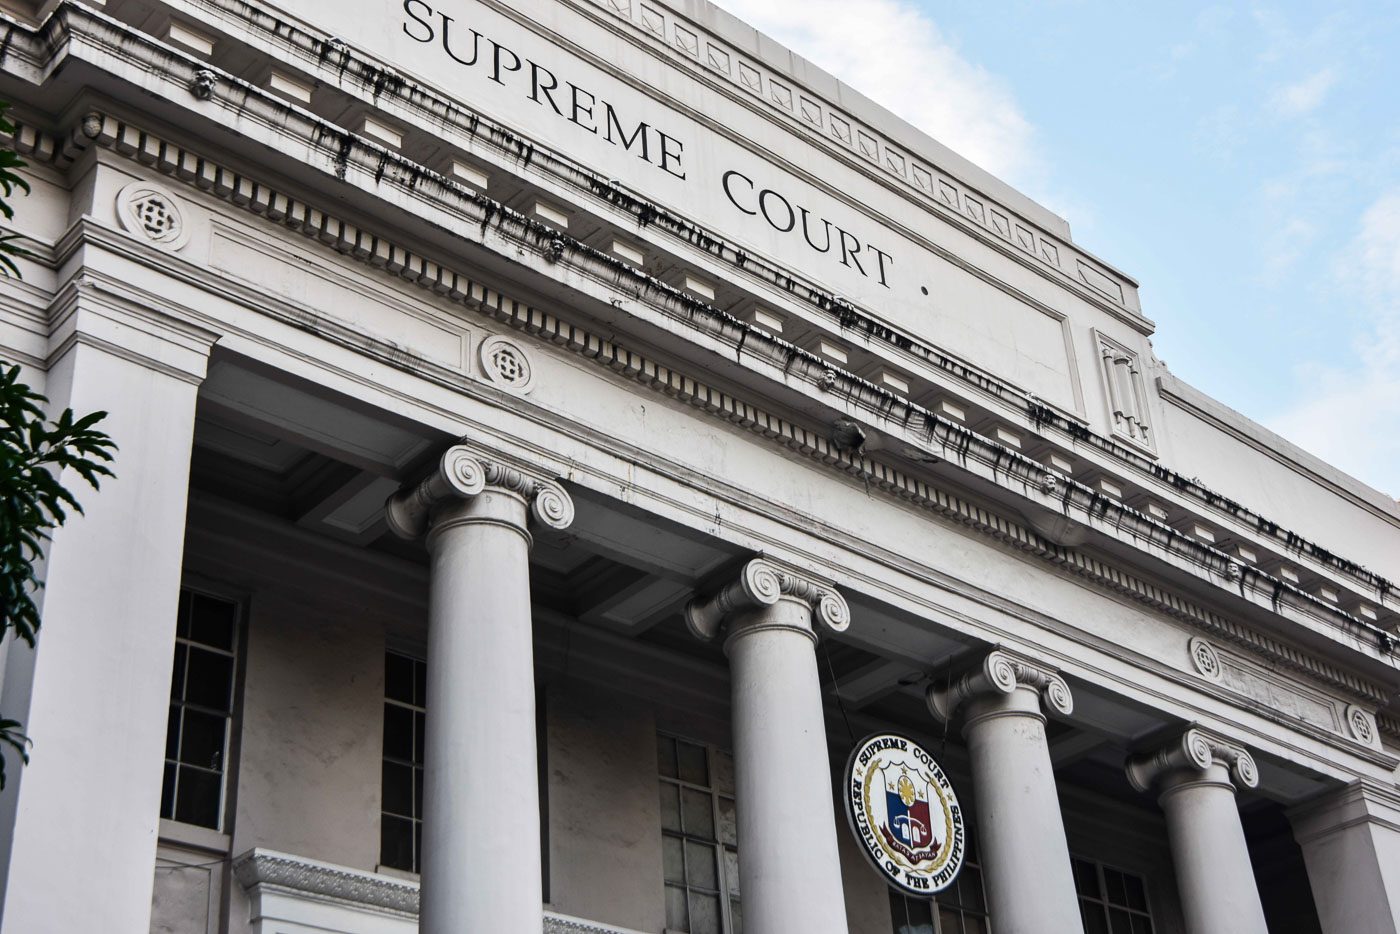 CA justices shortlisted to be next Supreme Court justice